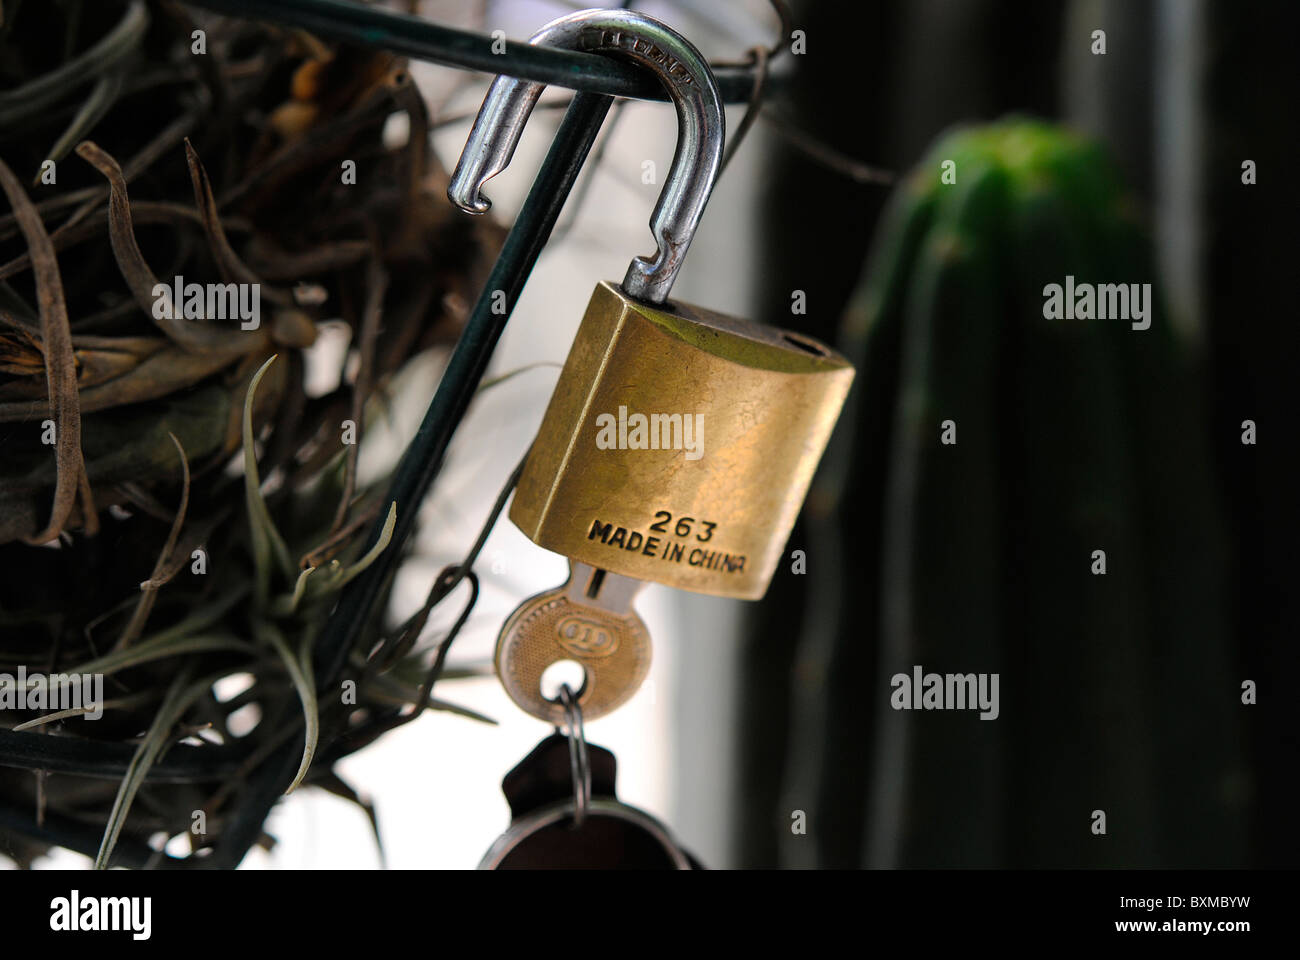 Padlock made at China, universal manufacture, almost everything in the world this done at Stock Photo